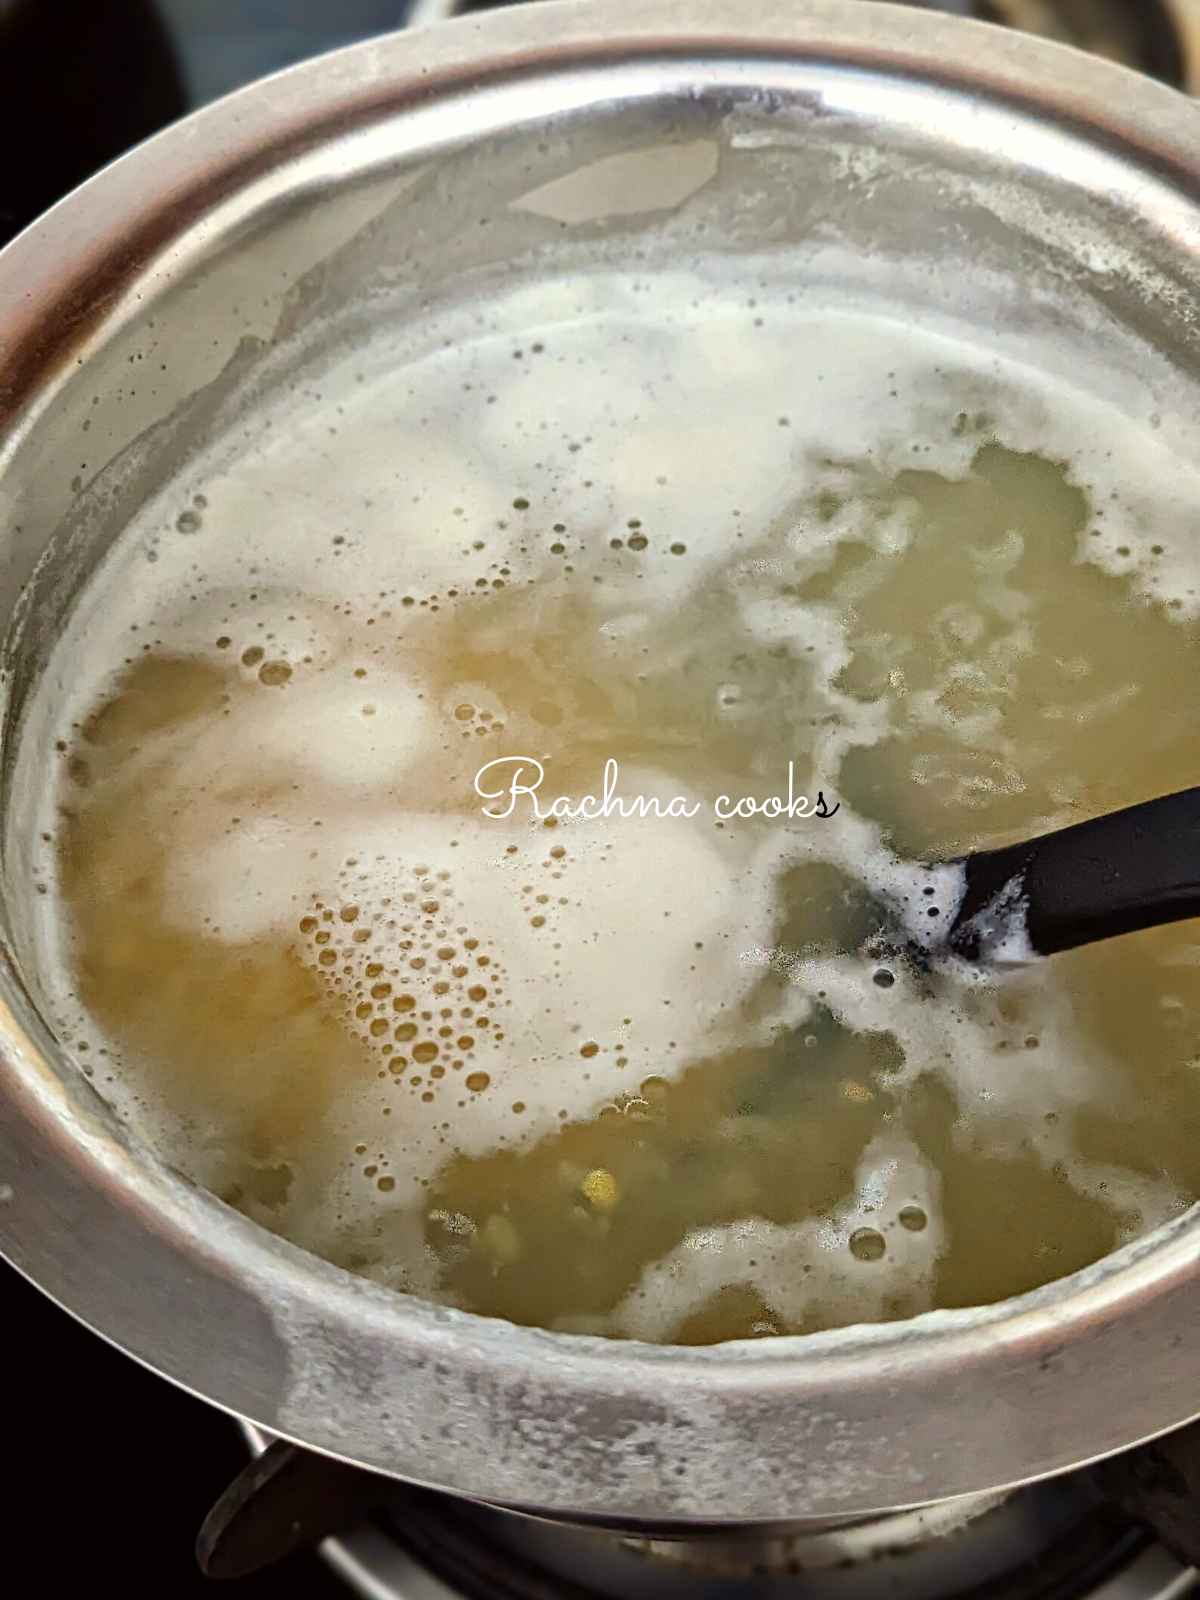 Moong dal being boiled in a pot of water.